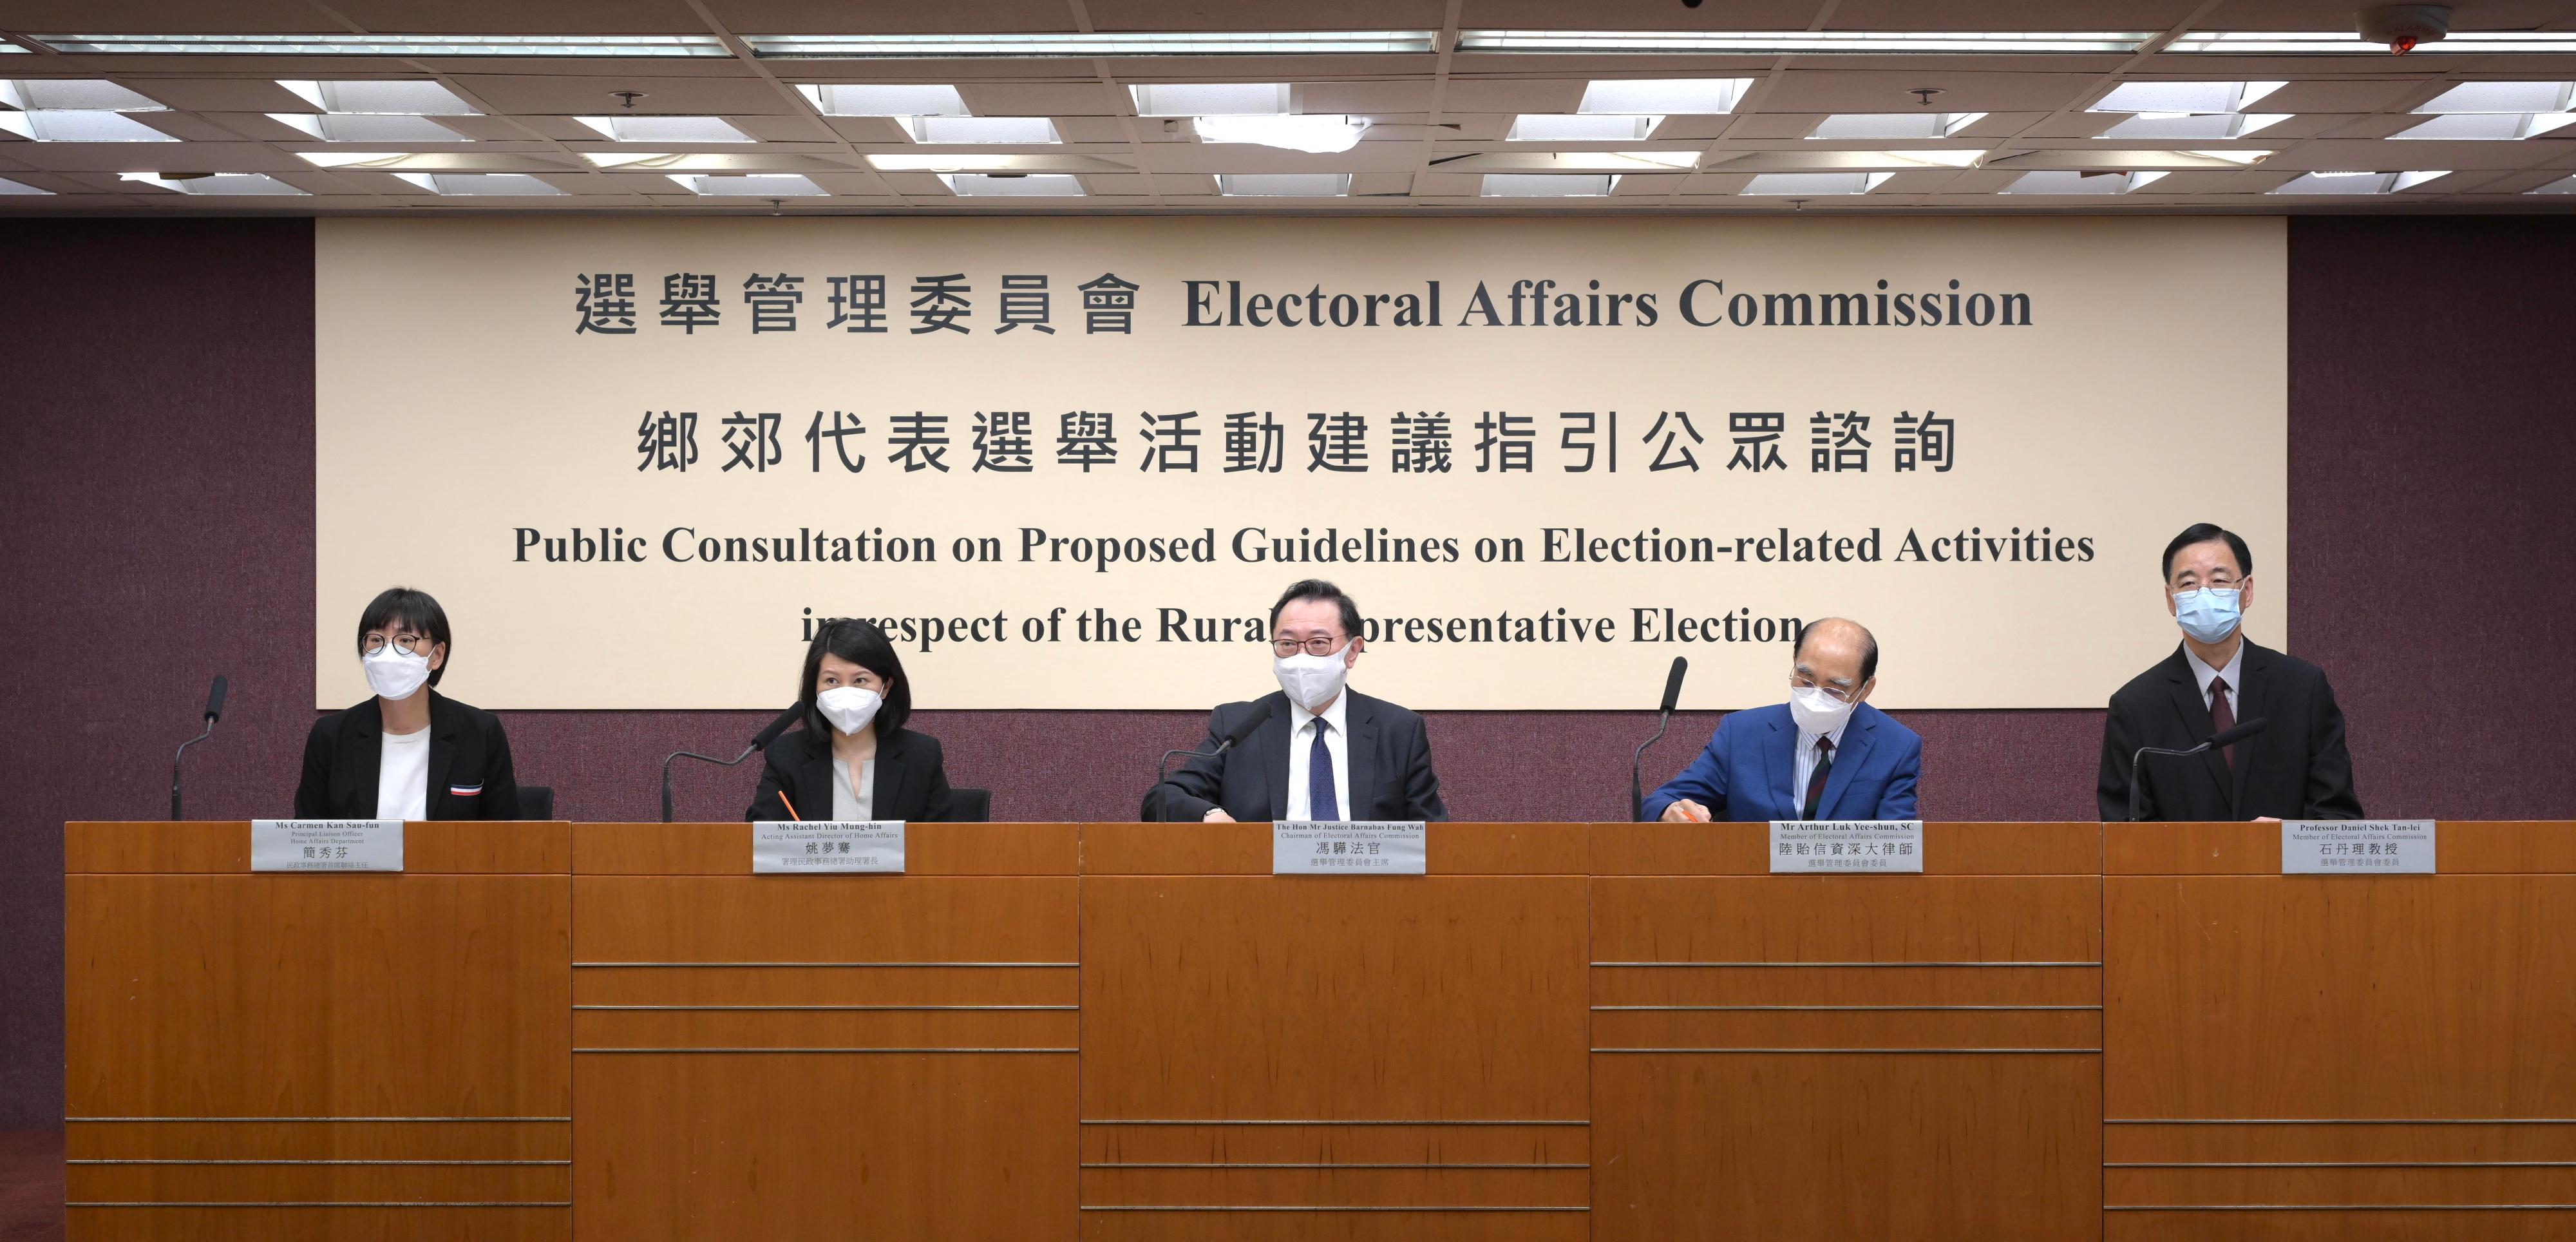 The Chairman of the Electoral Affairs Commission (EAC), Mr Justice Barnabas Fung Wah (centre), today (July 11) hosts a press conference to announce details of a public consultation exercise on the Proposed Guidelines on Election-related Activities in respect of the Rural Representative Election. Also present are EAC members Mr Arthur Luk, SC (second right), and Professor Daniel Shek (first right); the Acting Assistant Director of Home Affairs, Ms Rachel Yiu (second left); and Principal Liaison Officer of the Home Affairs Department Ms Carmen Kan (first left).